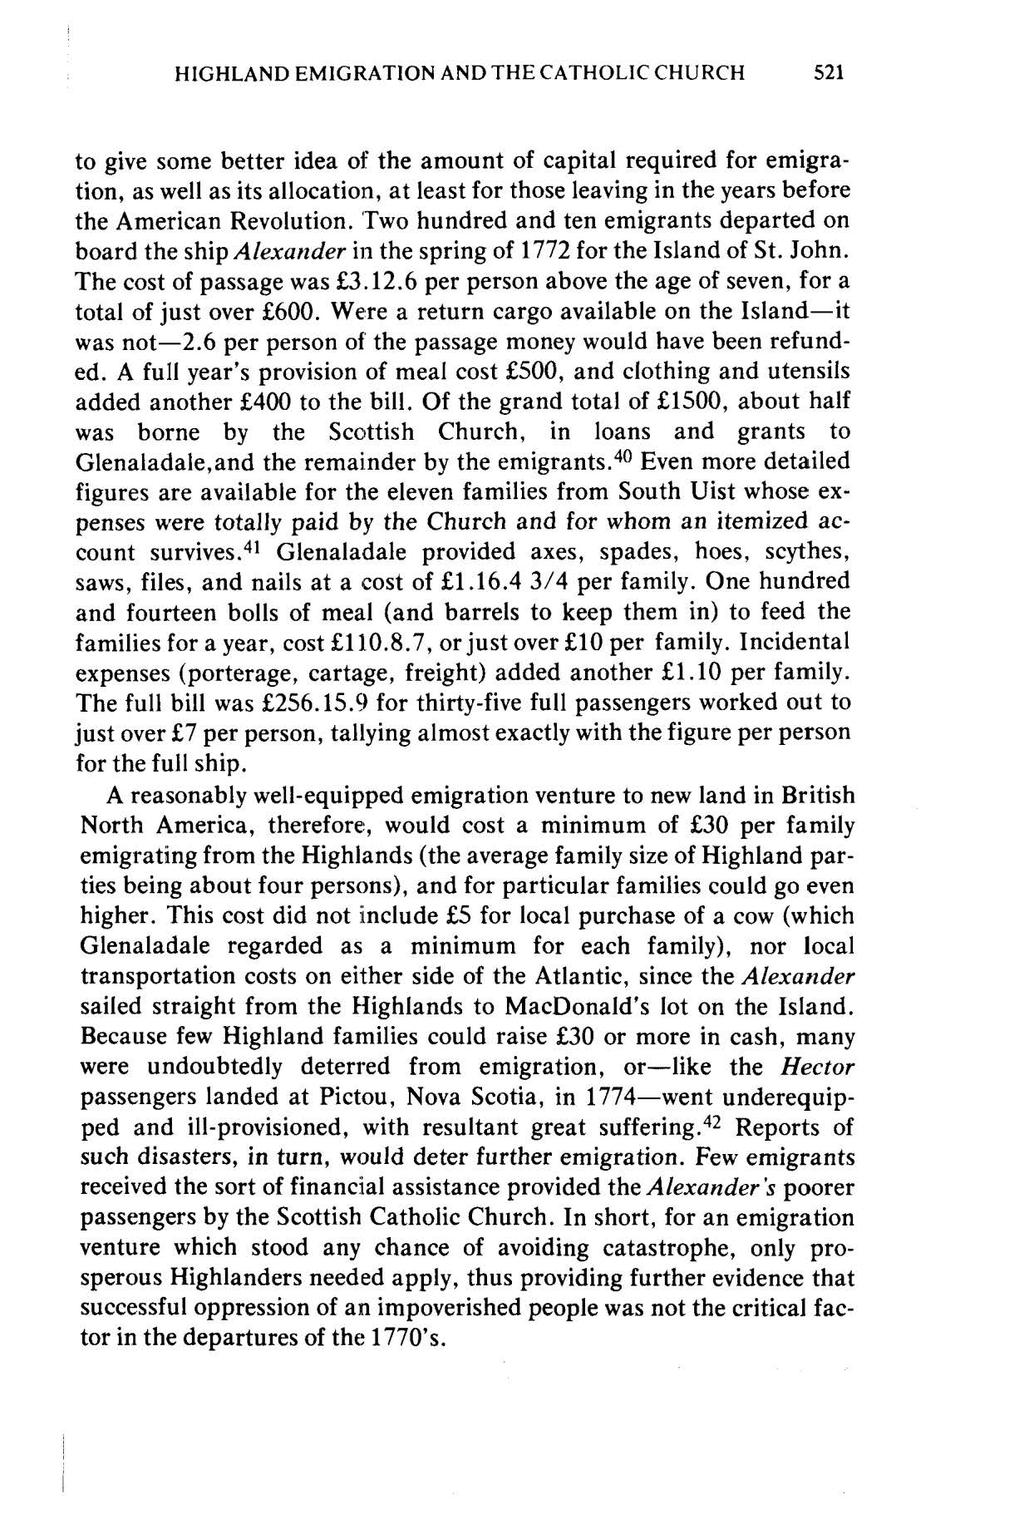 HIGHLAND EMIGRATION AND THE CATHOLIC CHURCH 521 to give some better idea of the amount of capital required for emigration, as well as its allocation, at least for those leaving in the years before